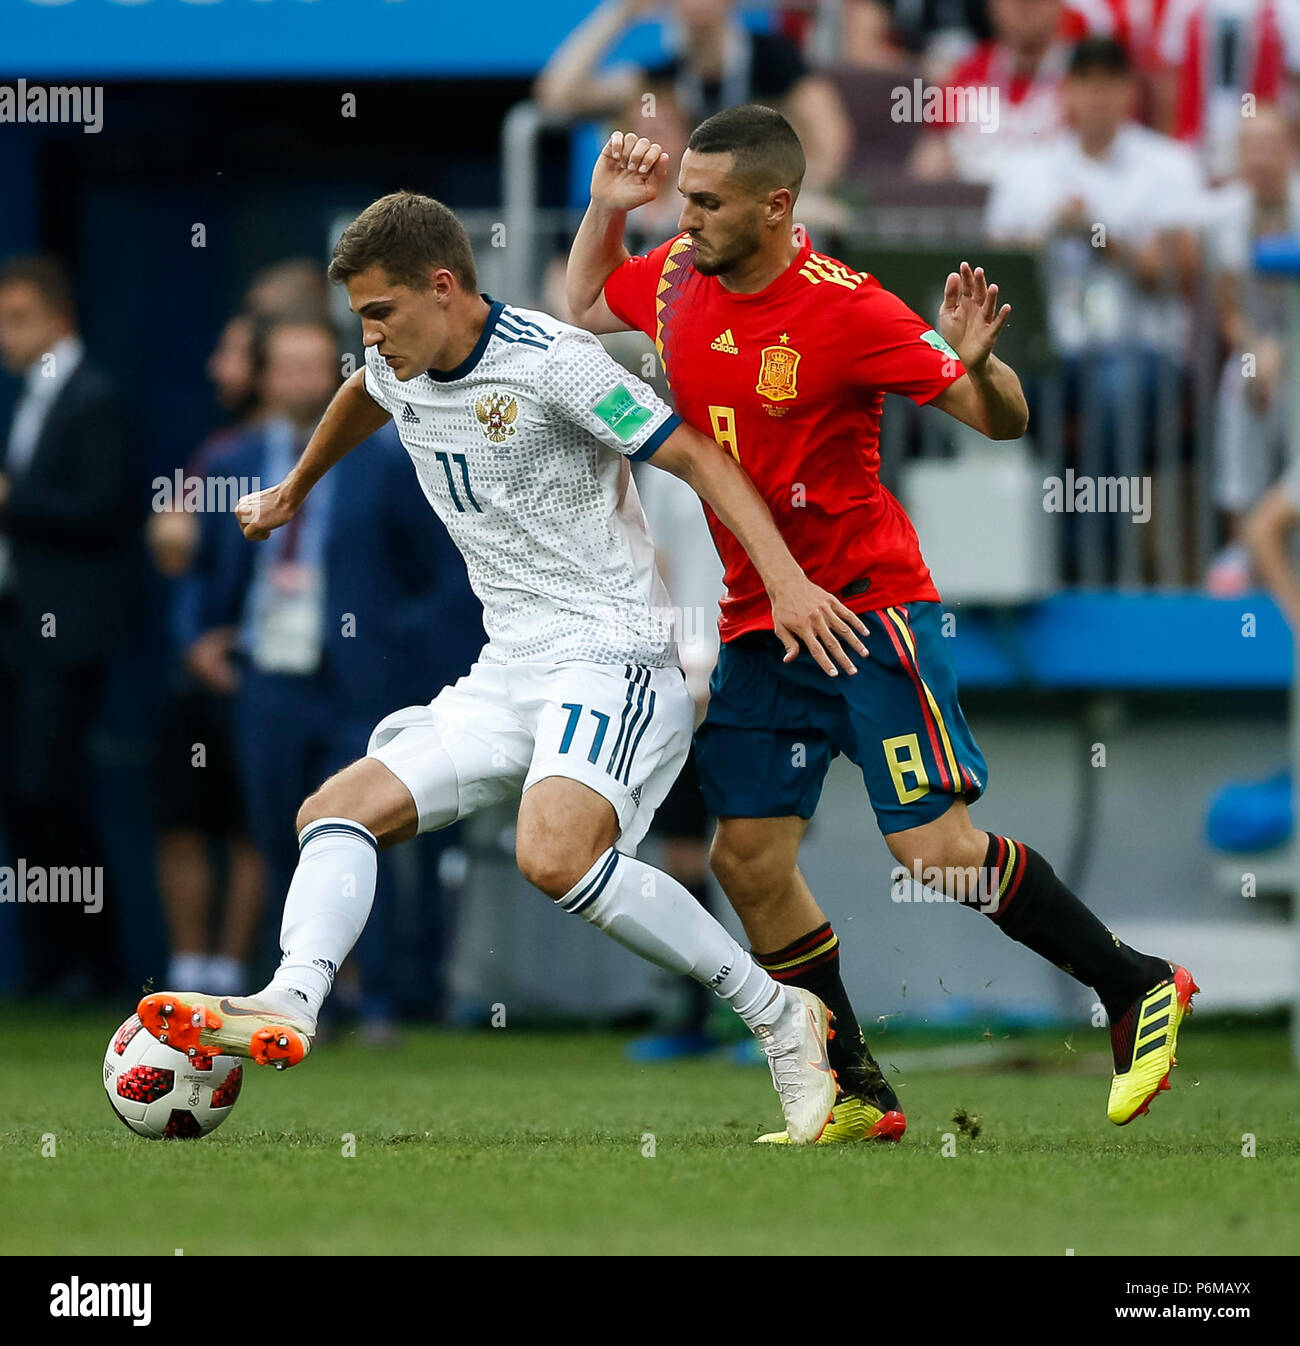 Moscow, Russia. 1st July, 2018. Roman Zobnin of Russia and Koke of Spain during the 2018 FIFA World Cup Round of 16 match between Spain and Russia at Luzhniki Stadium on July 1st 2018 in Moscow, Russia. Credit: PHC Images/Alamy Live News Stock Photo